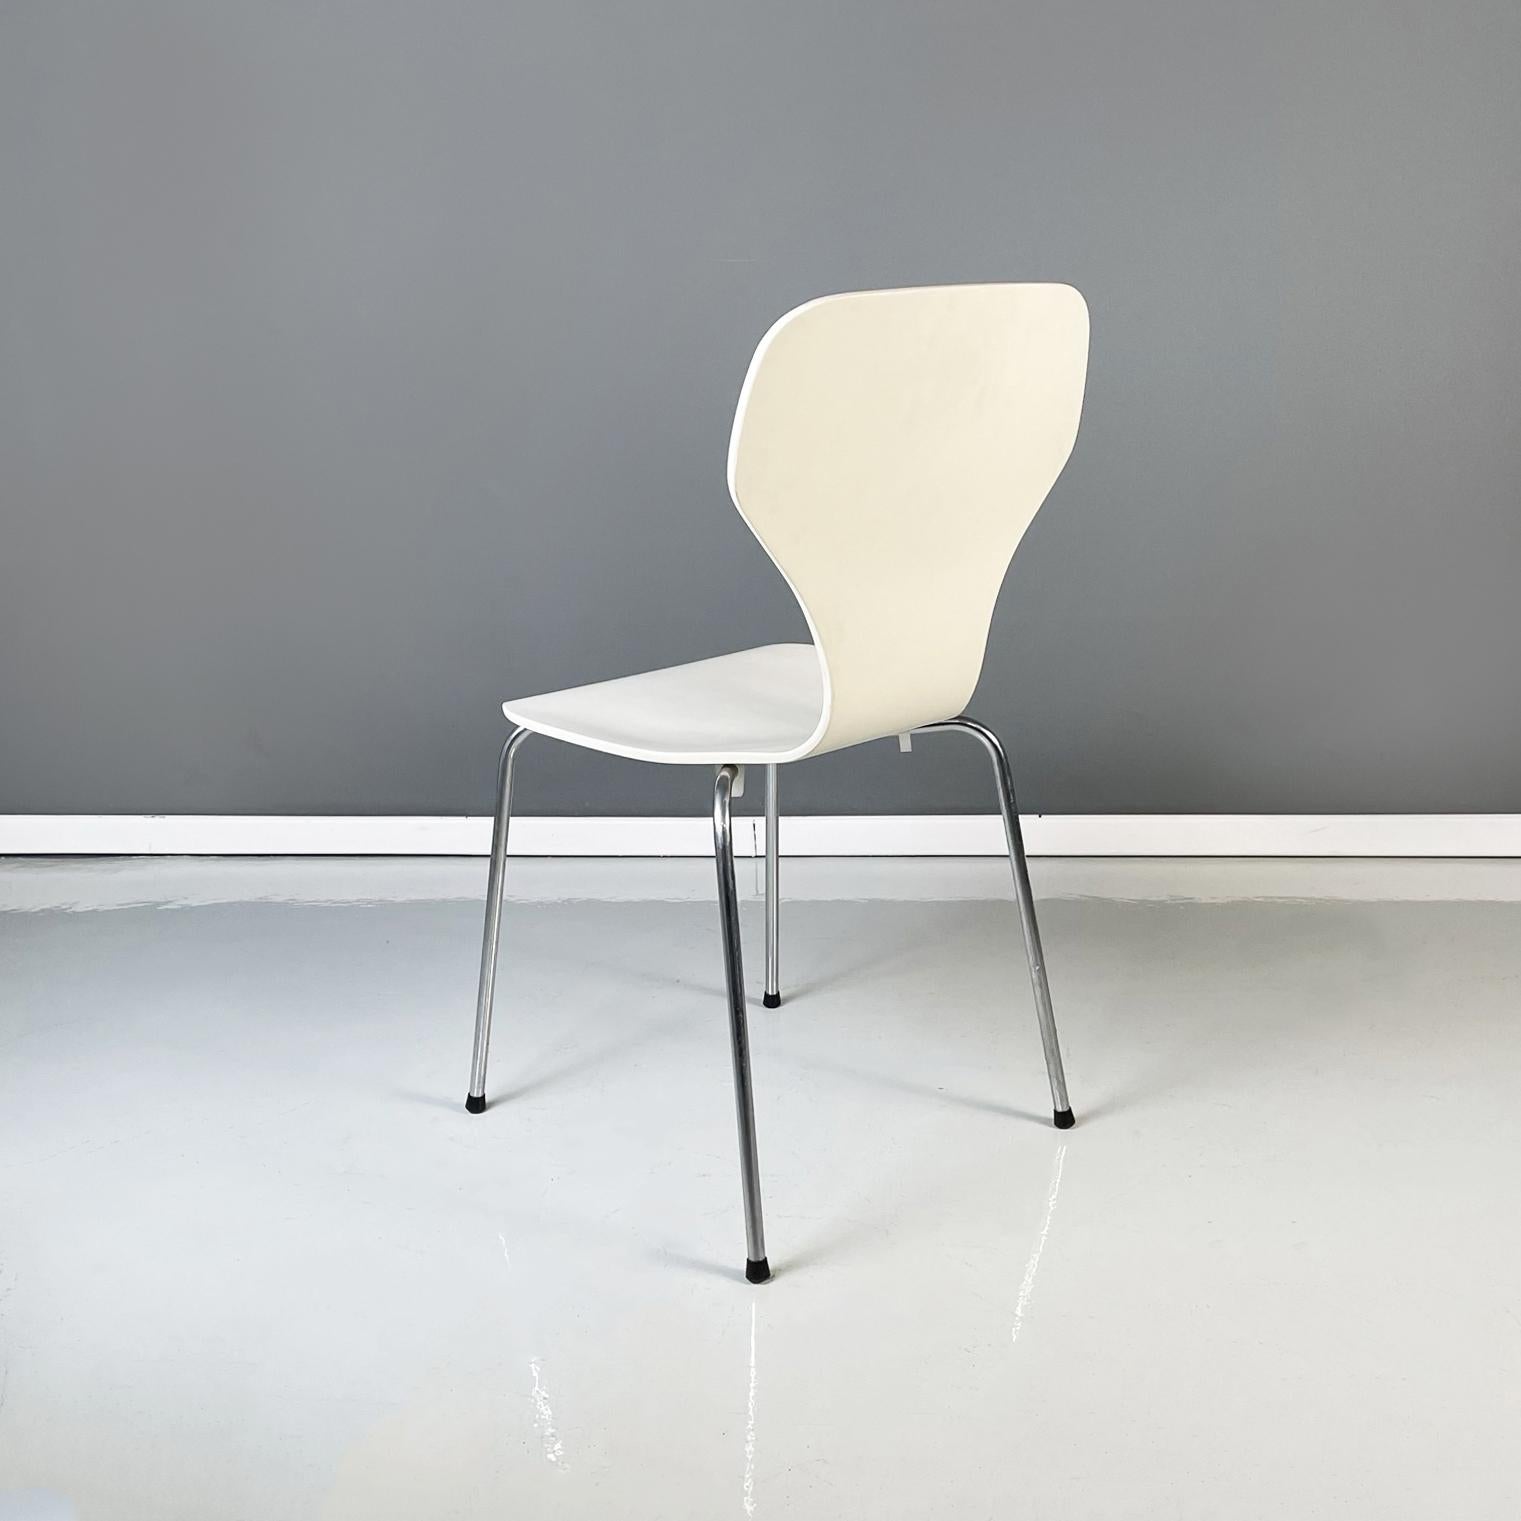 Late 20th Century Danish Modern White Wooden and Steel Chair by Phoenix, 1970s